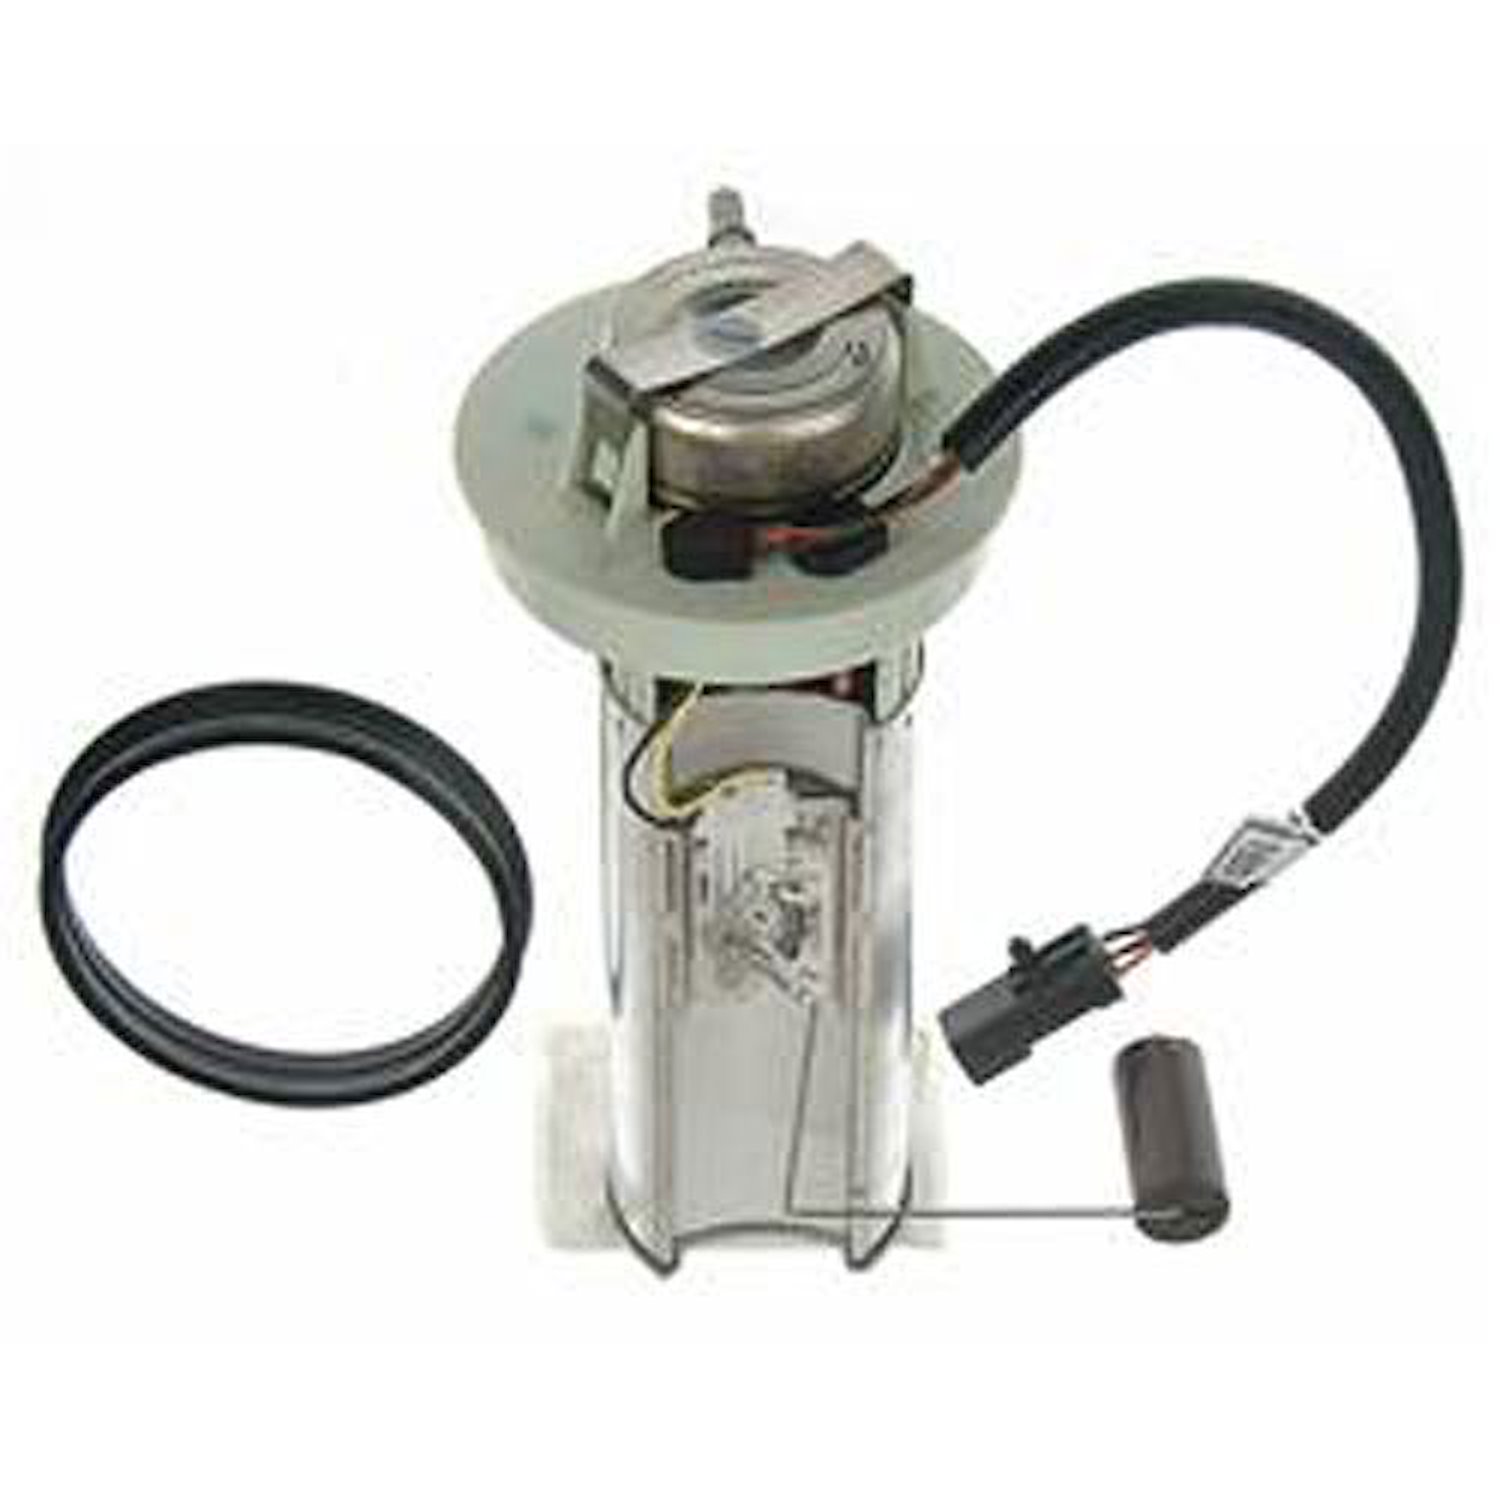 OE Chrysler/Dodge/Jeep Replacement Electric Fuel Pump Module Assembly 1997-98 Jeep Grand Cherokee 4.0L L6/5.2L/5.9L V8